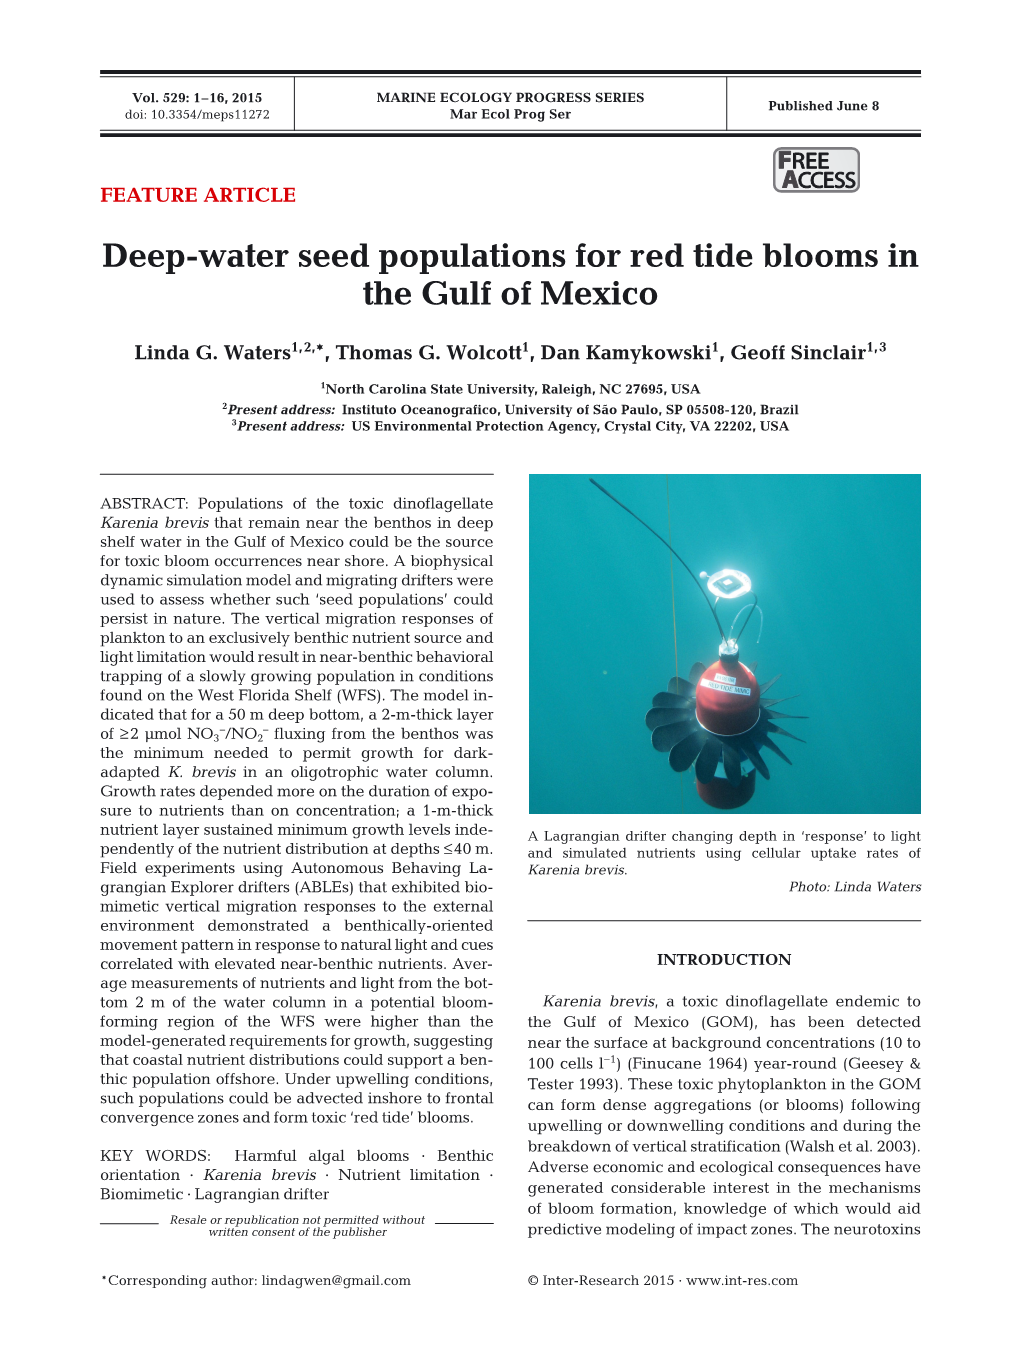 Deep-Water Seed Populations for Red Tide Blooms in the Gulf of Mexico